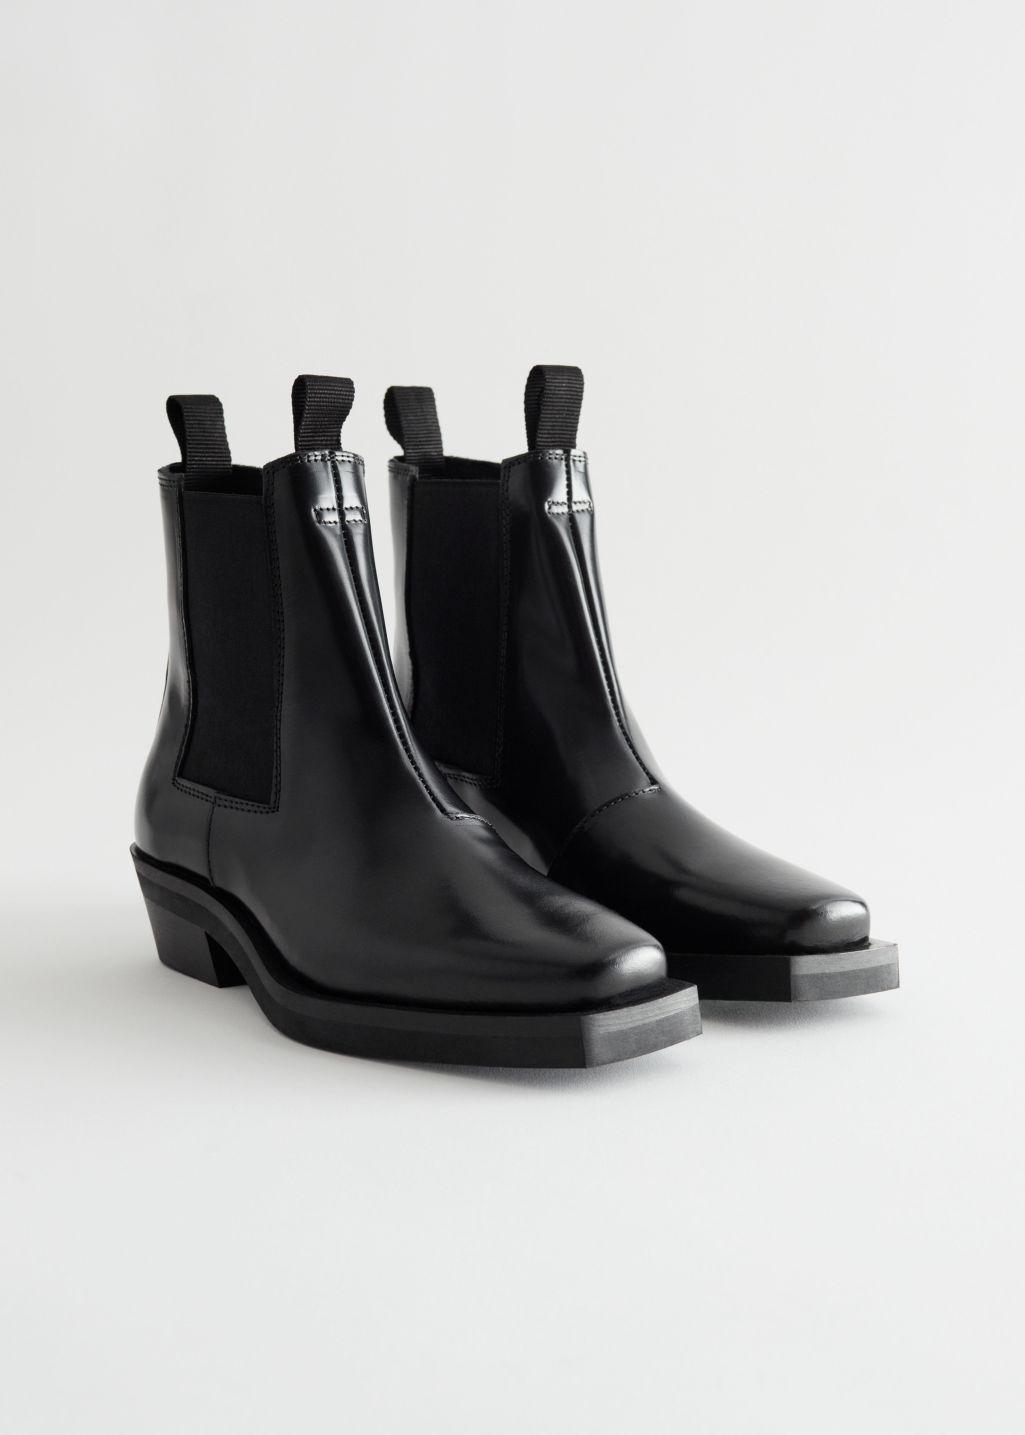 & Other Stories Leather Chelsea Western Boots in Black | Lyst